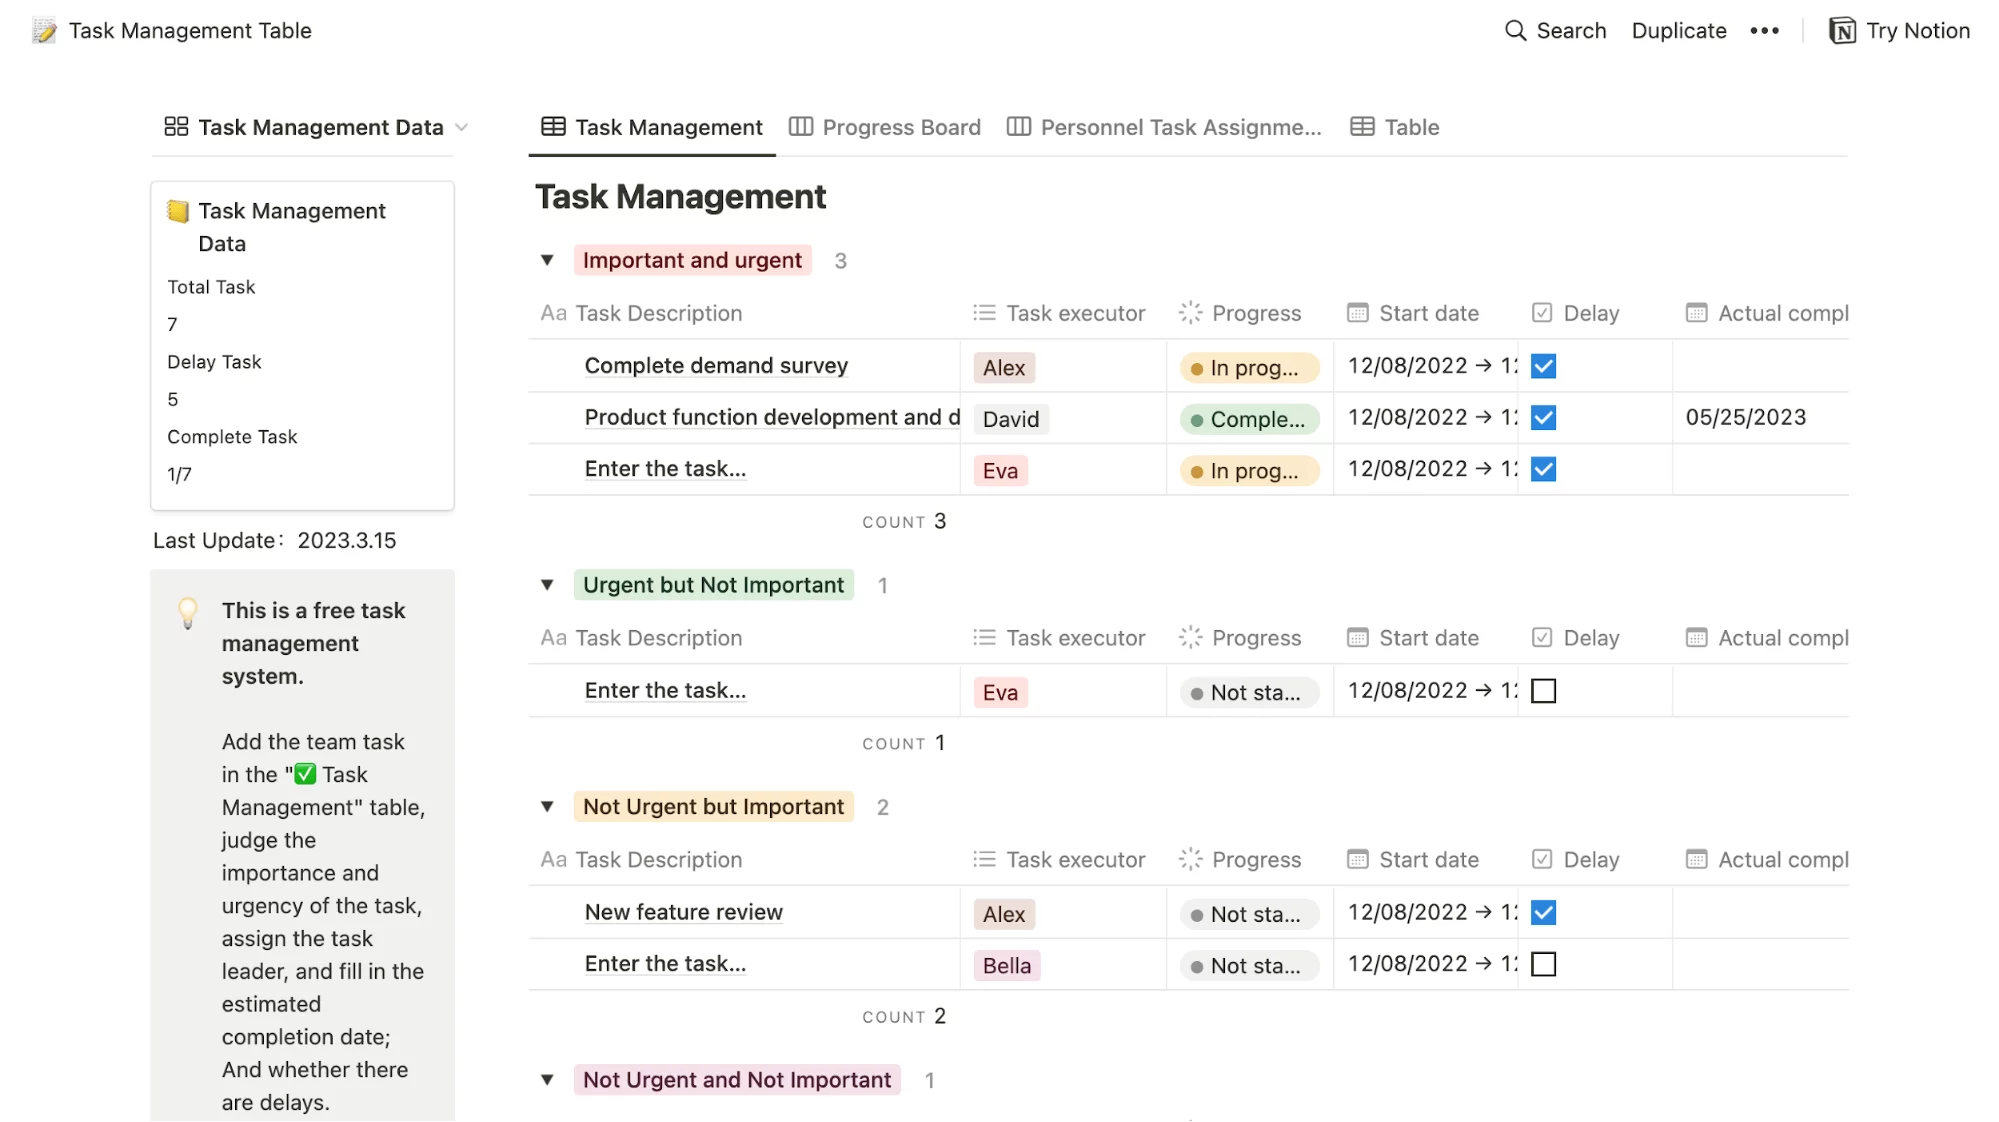 Notion screenshot showing a task management table which includes task descriptions, task executor, progress, start date, delay checkboxes and actual completion dates.